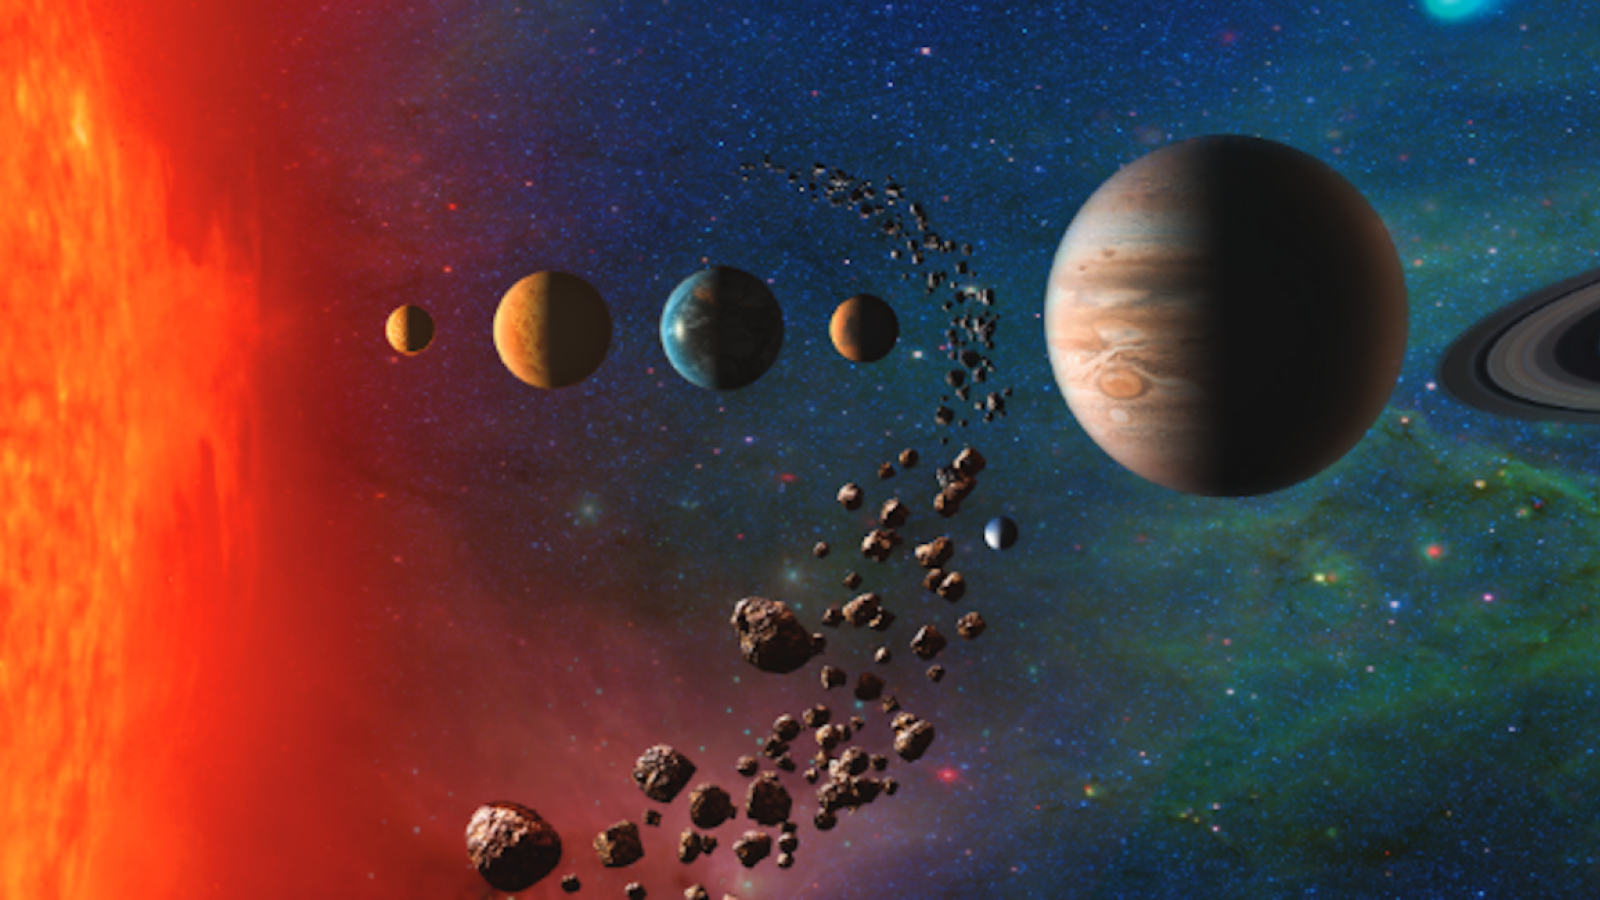 Artist illustration of the planets in our solar system - not to scale